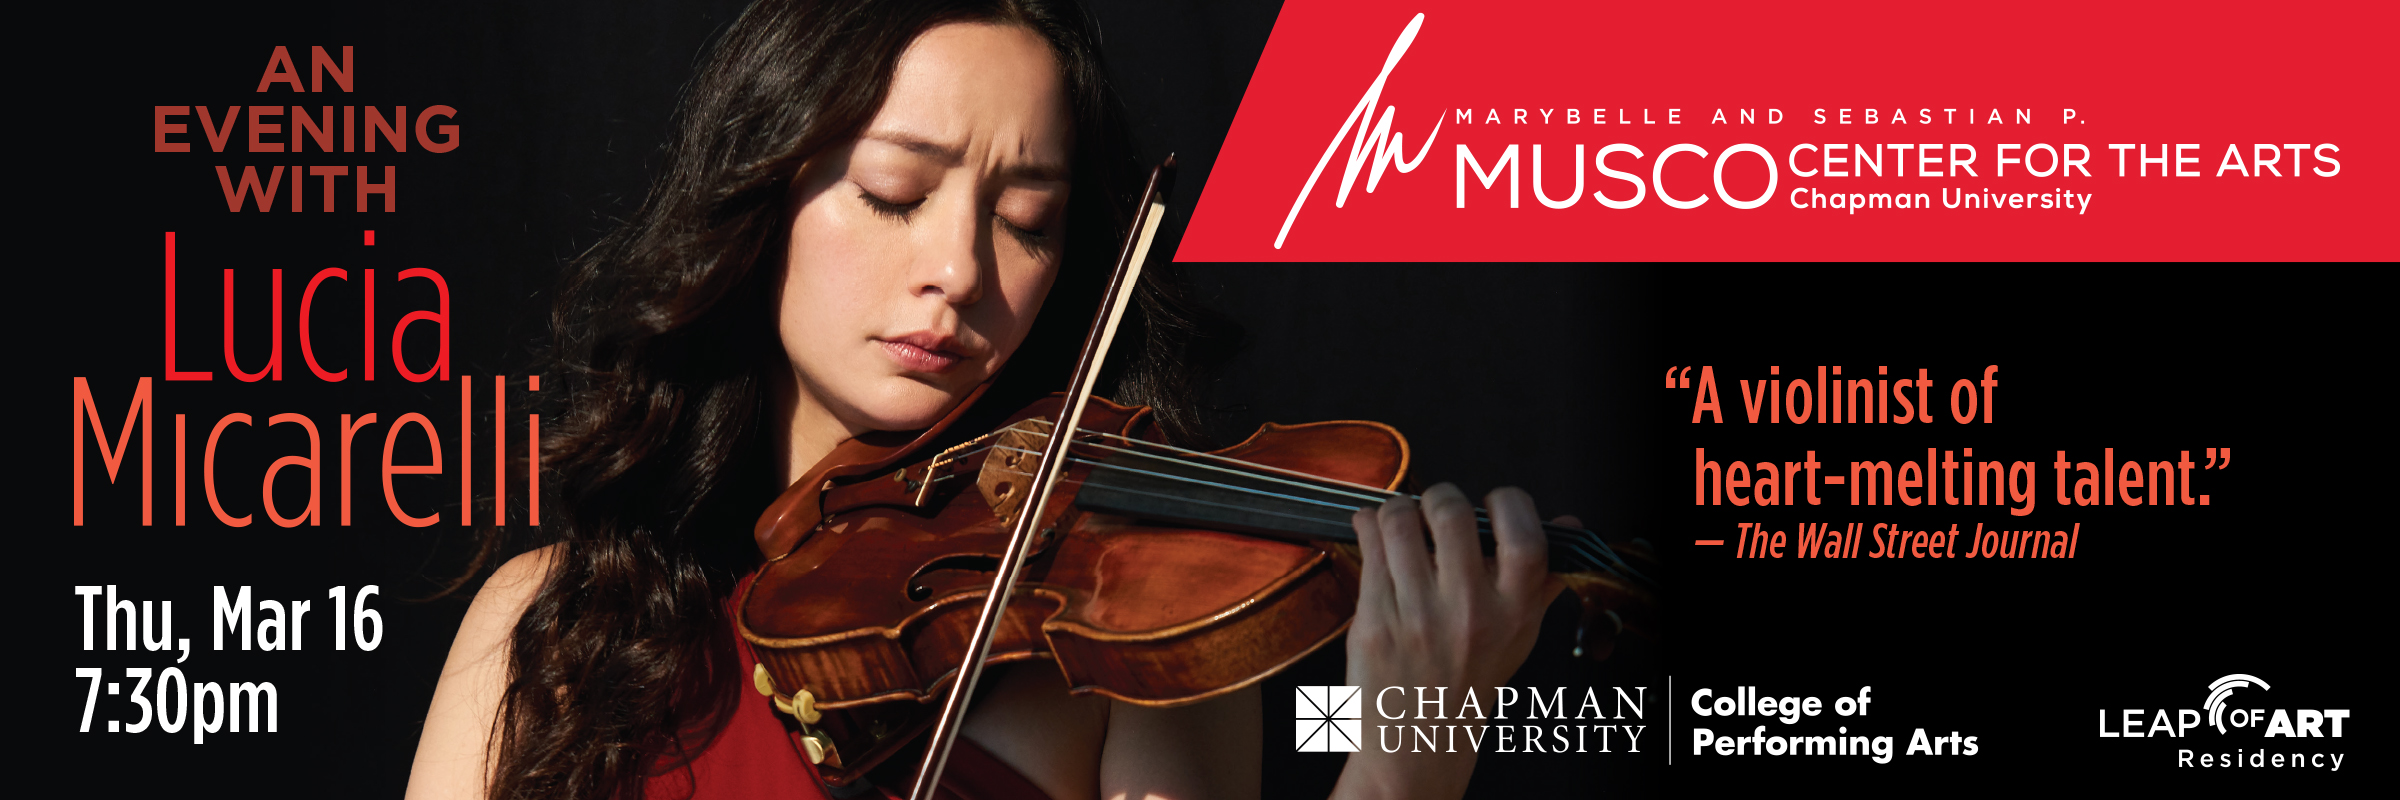 Marybelle and Sebastian P. Musco Center for the Arts. Chapman University. College of Performing Arts. Lucia Micarelli Quartet. Thu, Mar 16, 7:30pm. "A violinist of heart-melting talent." - The Wall Street Journal. Lucia Micarelli plays a violin soulfully under stage lights.